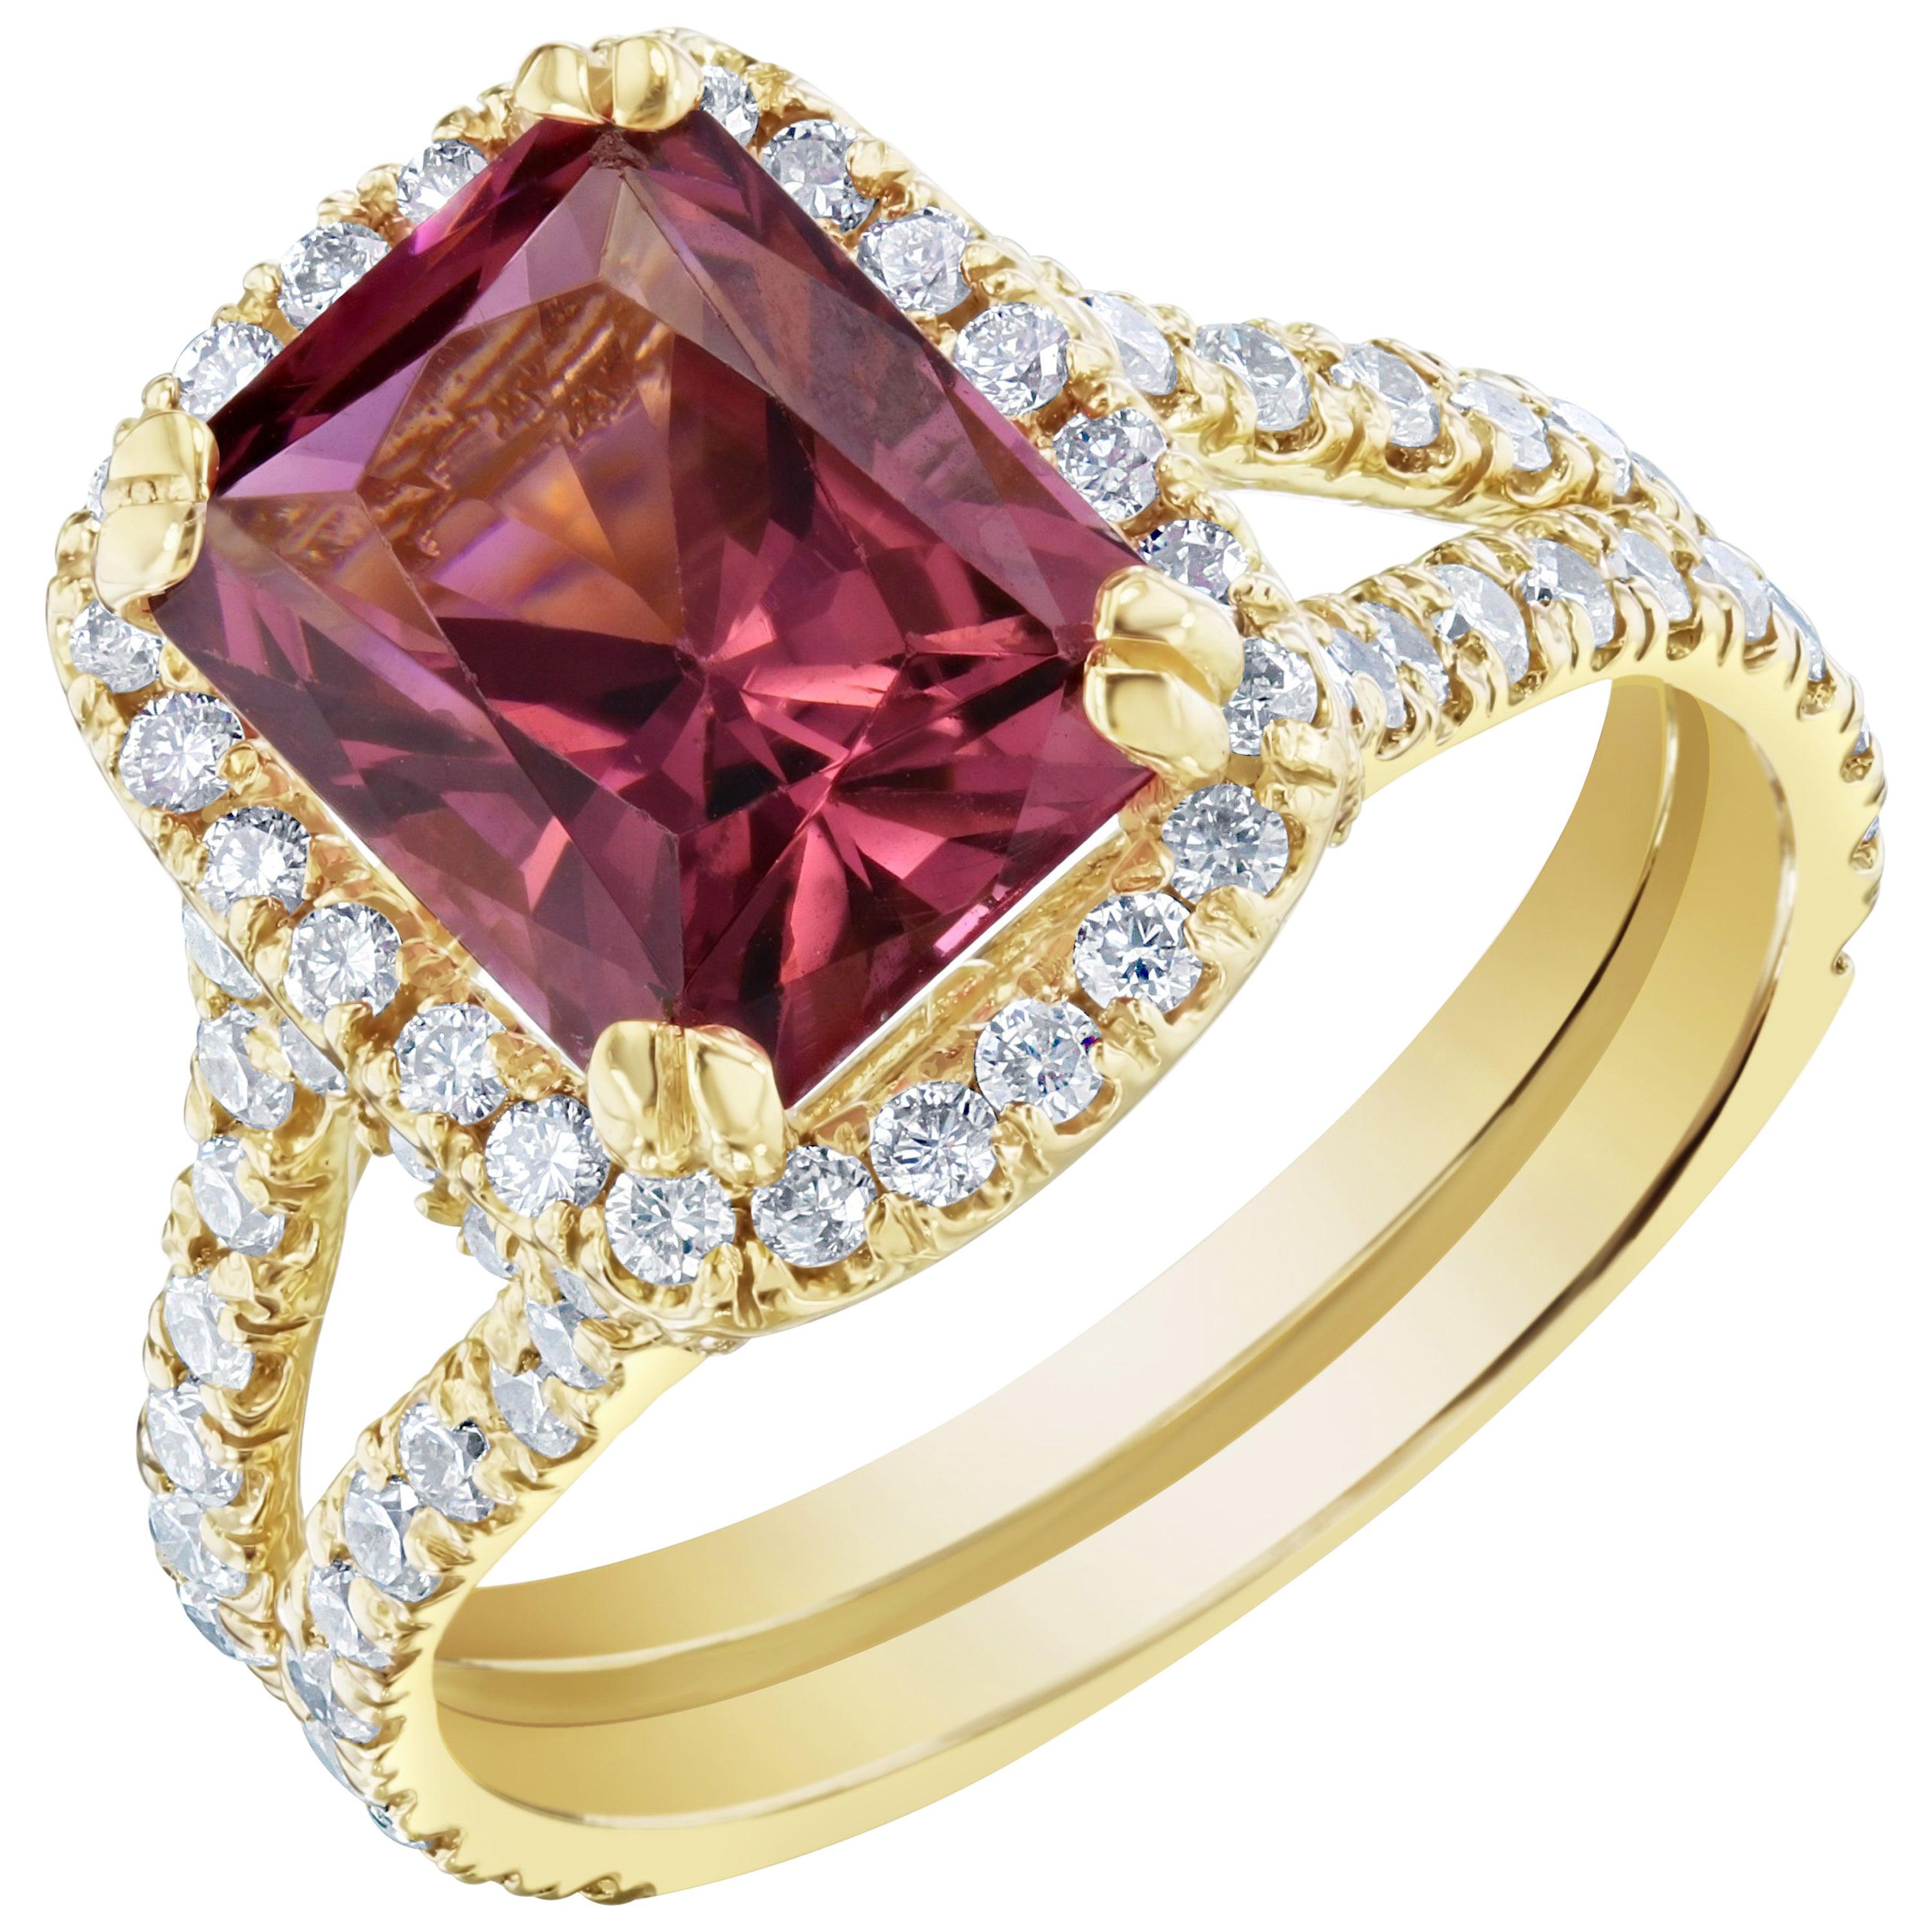 Stunning Dark Pink Tourmaline and Diamonds set in a spit-shank and halo setting! This ring has a 2.97 carat Rectangle Cut Tourmaline in the center of the ring and is surrounded by 92 Round Cut Diamonds that weigh 1.04 carats. The clarity and color